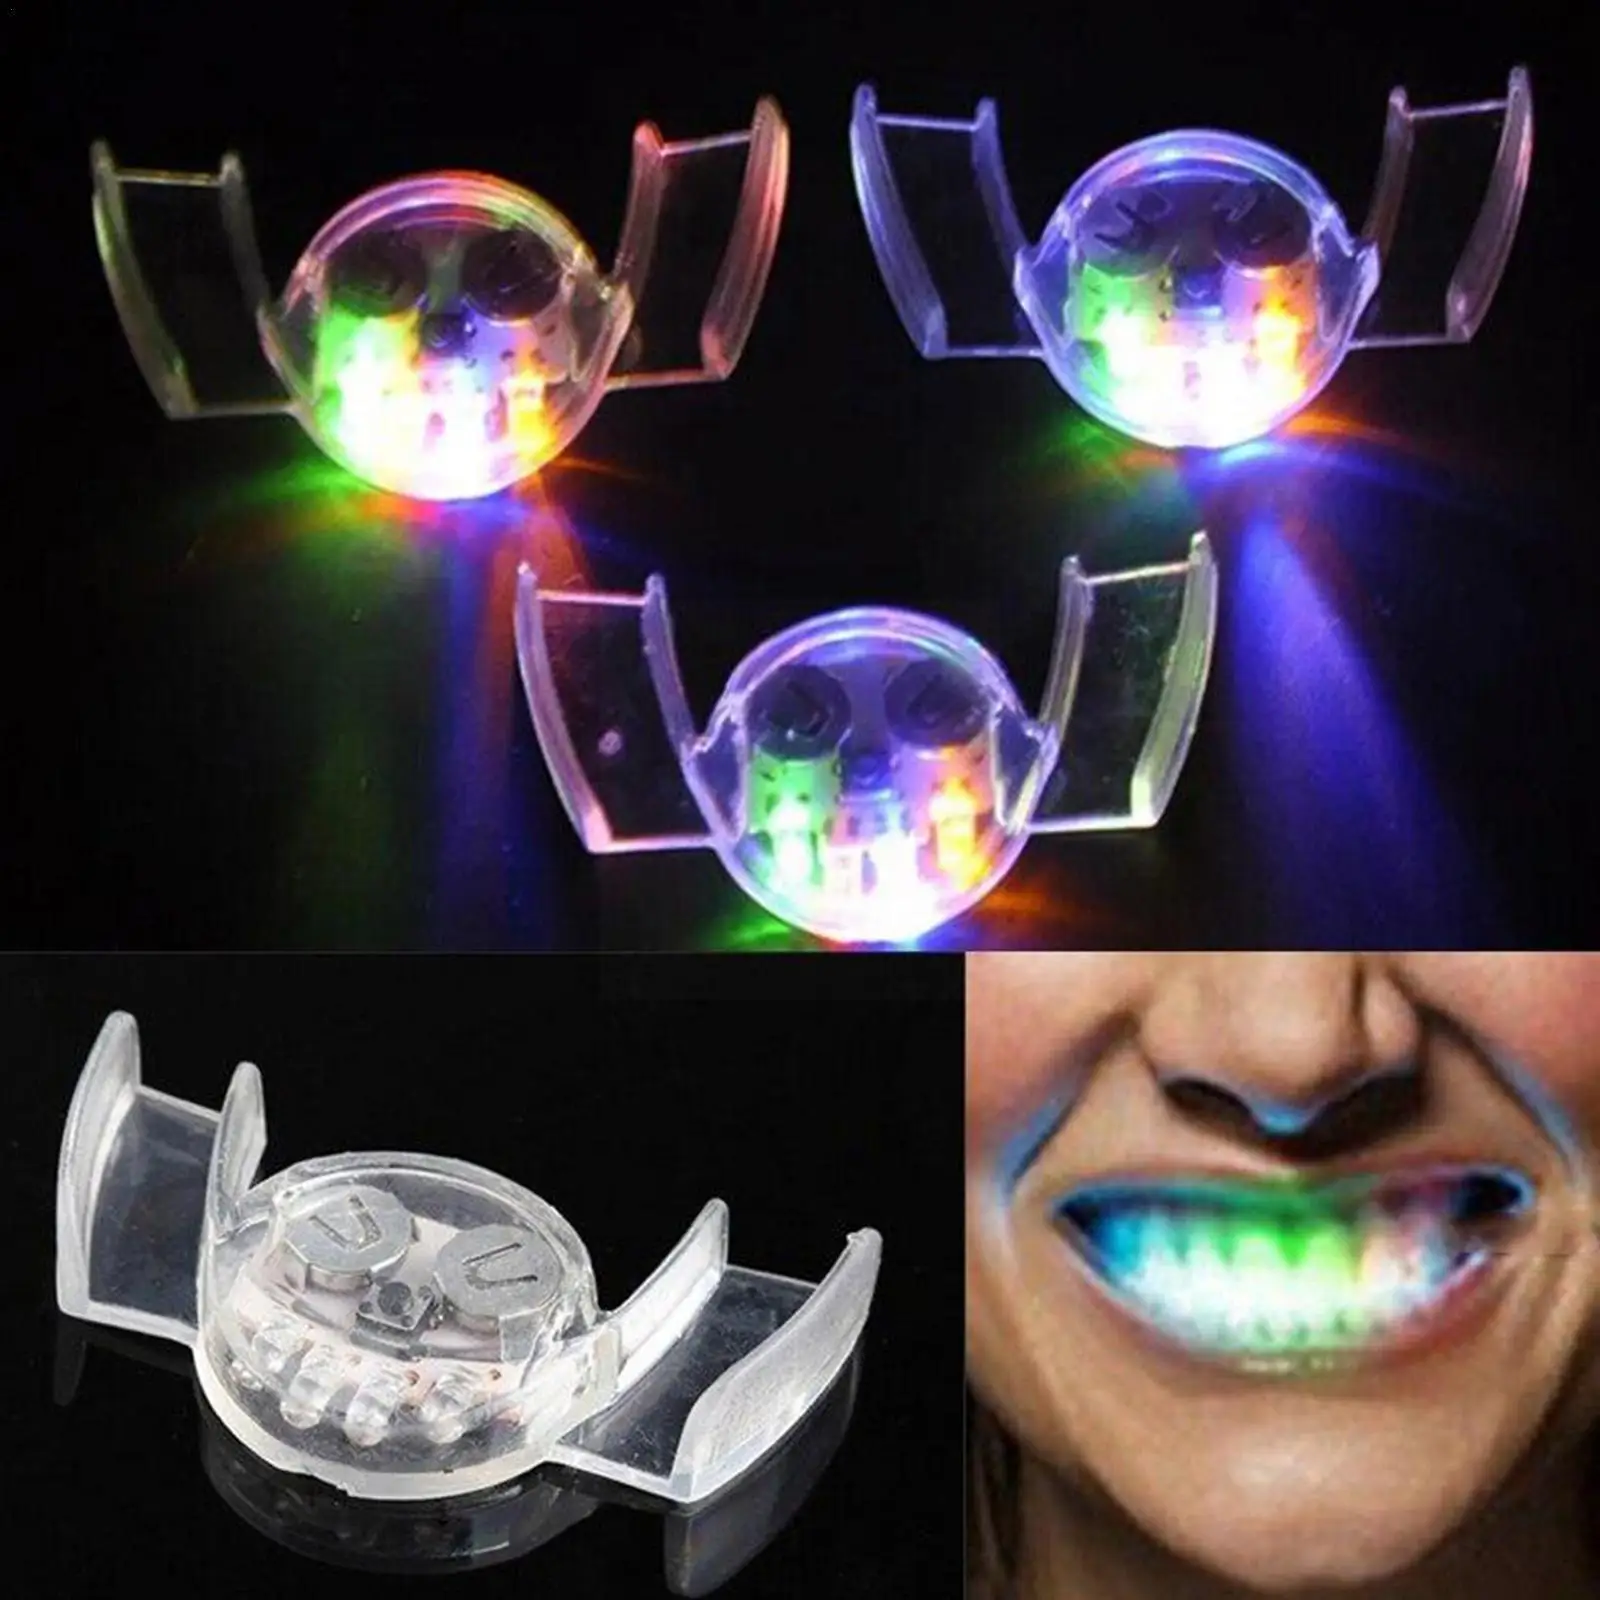 

Halloween Glowing Braces Flashing Led Light Up Mouth Braces Piece Glow Teeth Glow Party Supplies For Halloween Party Rave Y6o2